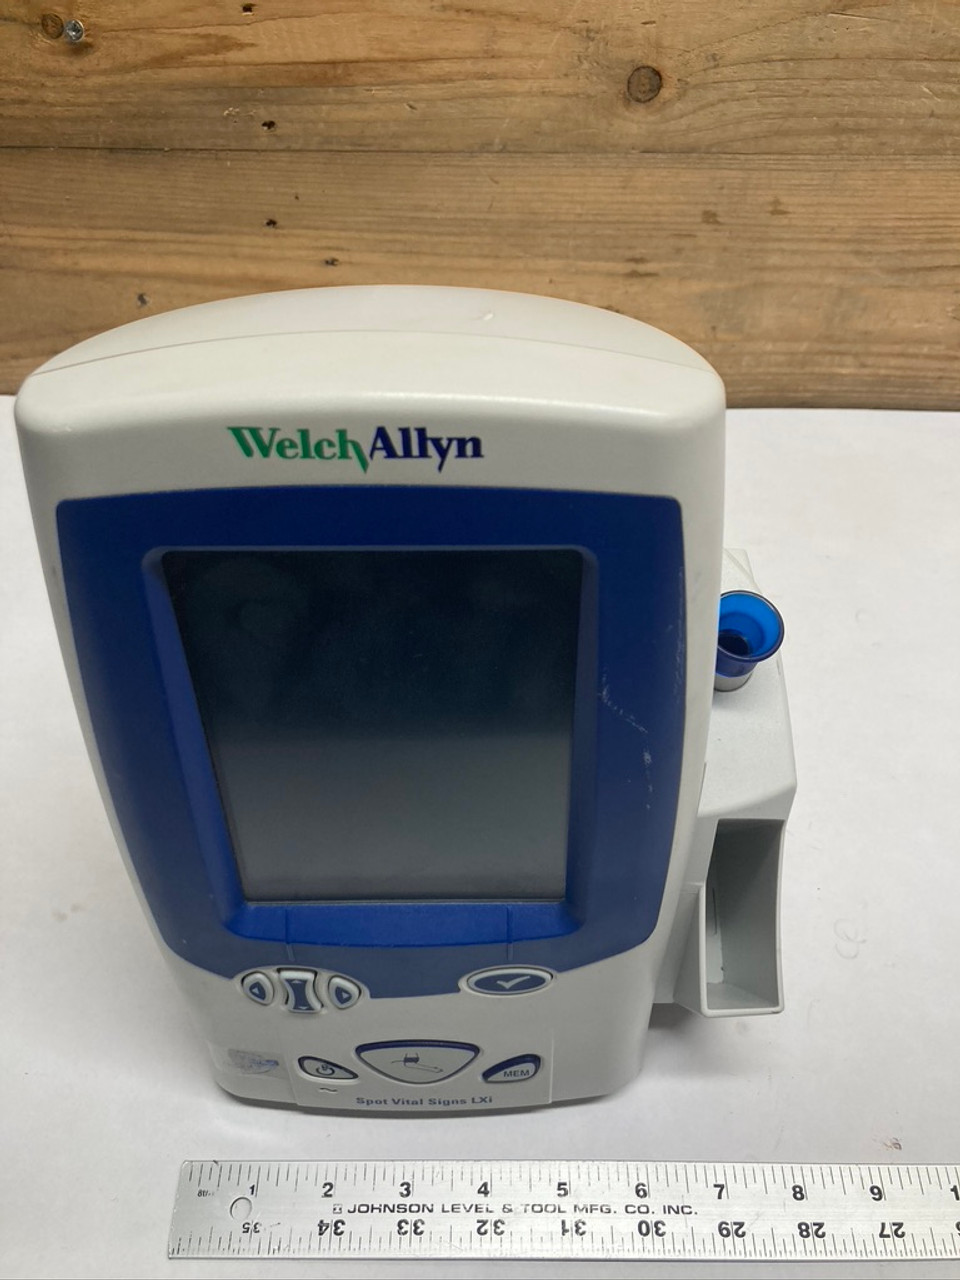 Spot Vital Signs LXi Monitor 45NT0 Welch Allyn